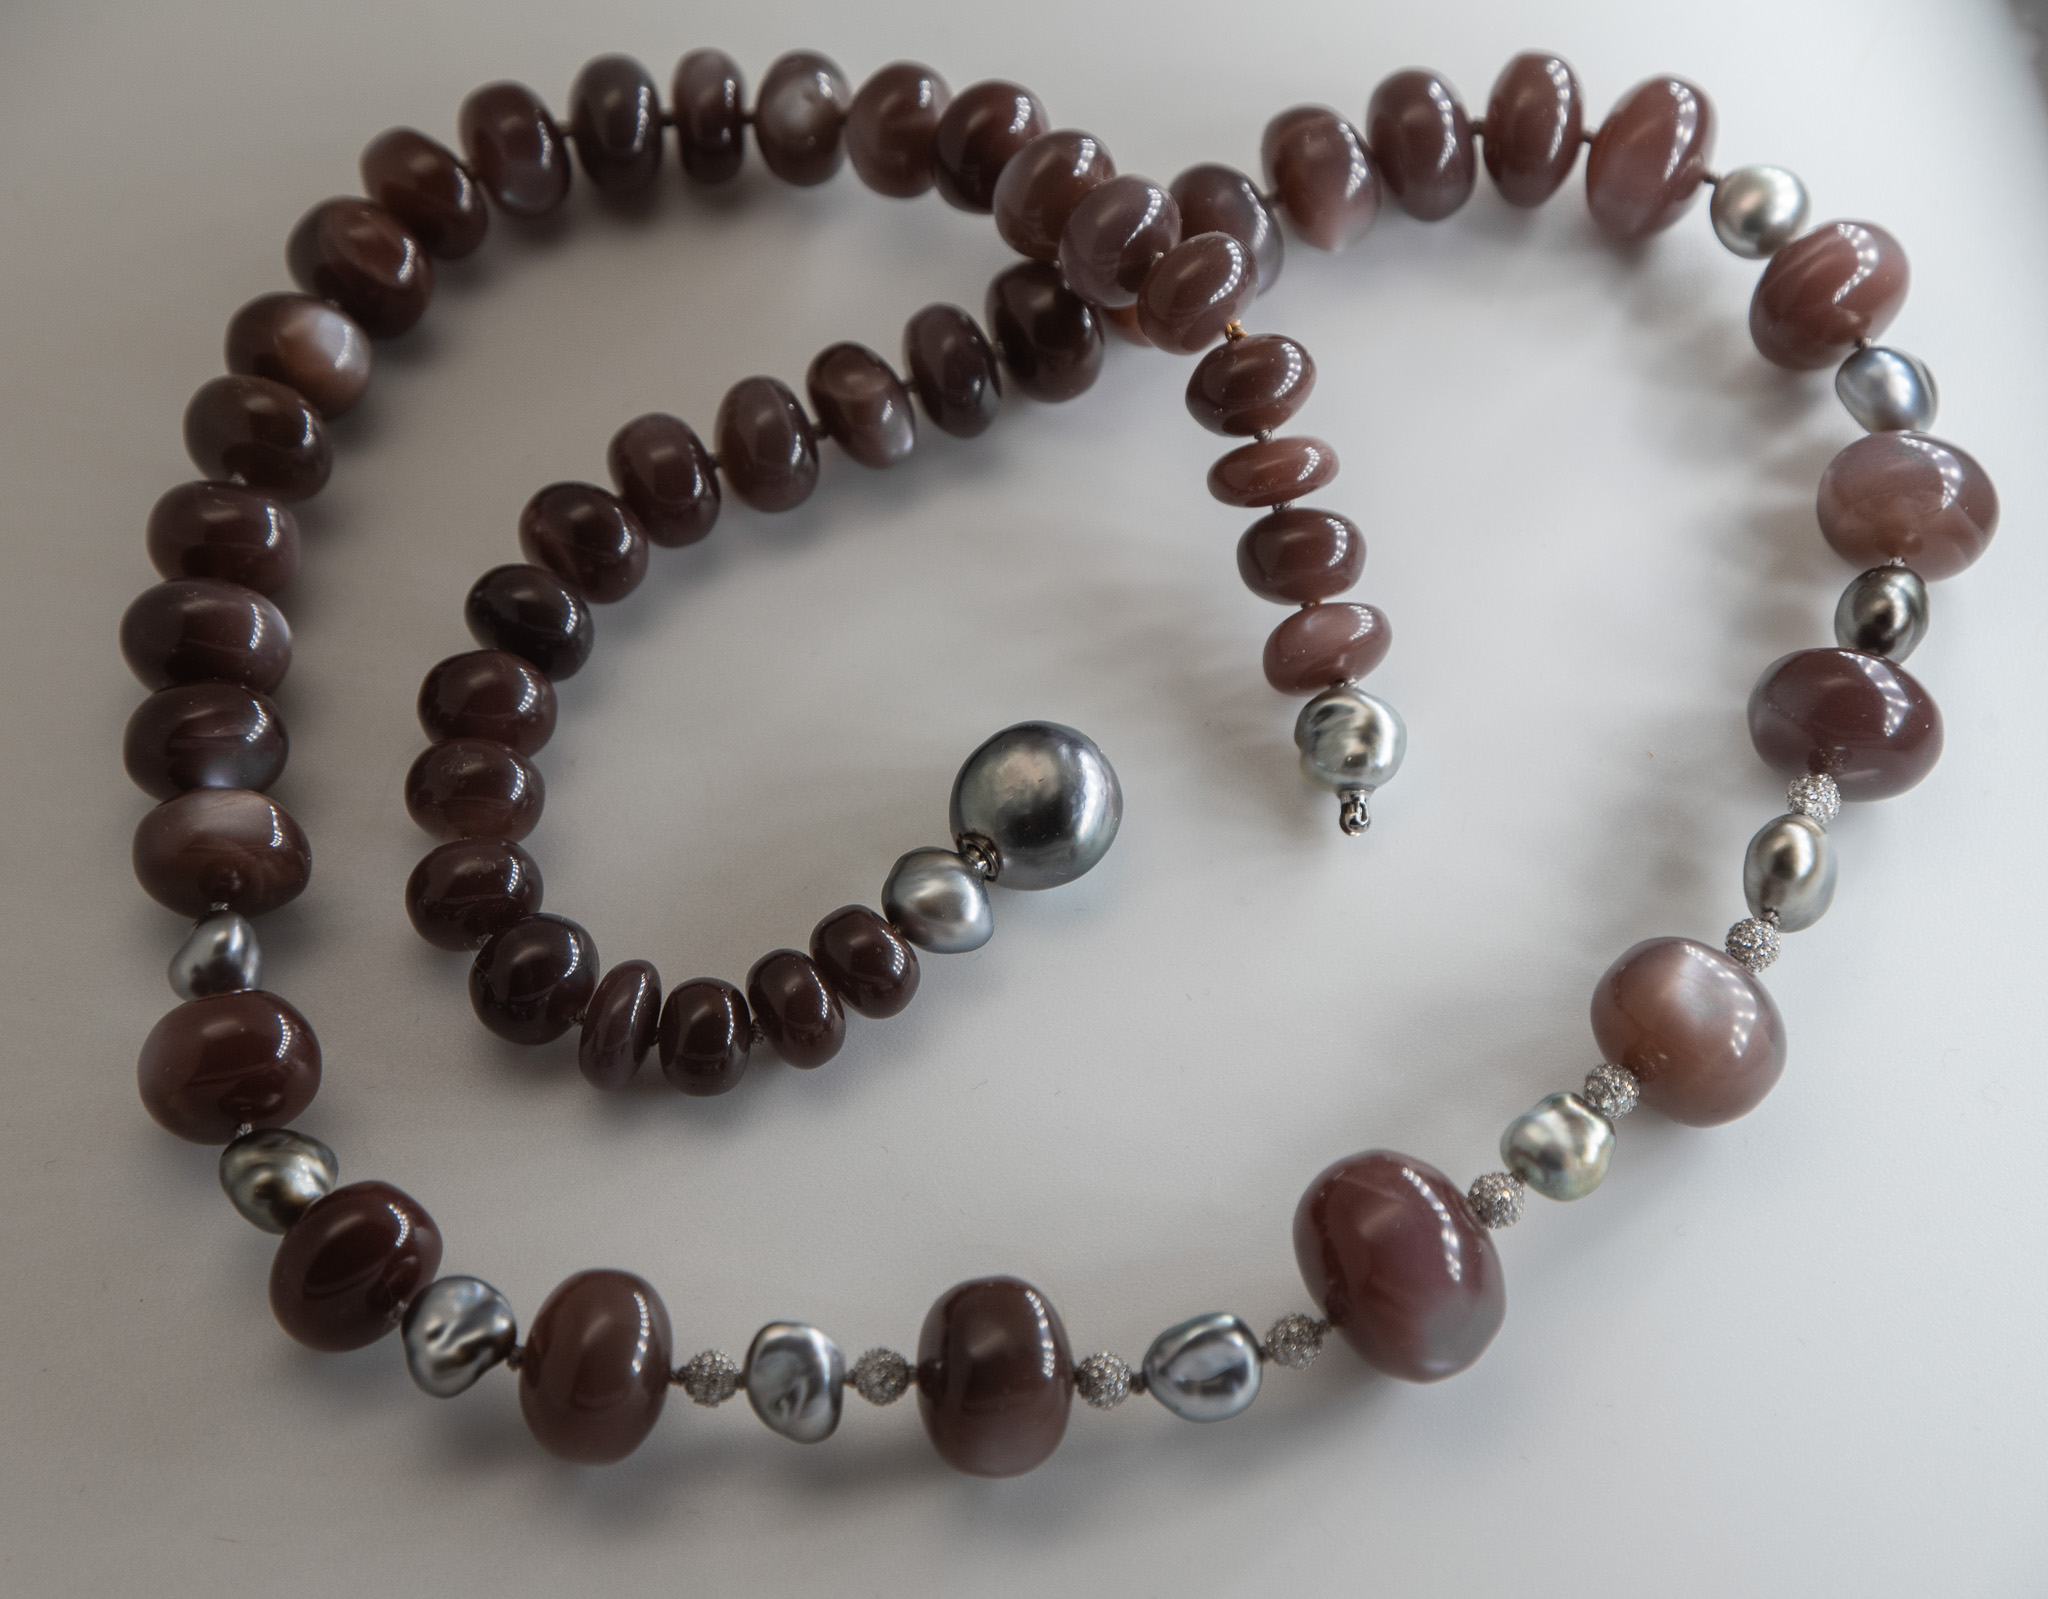 Chocolate moonstones, 18K white gold diamond beads and Tahitian Keshi pearls, showing 13mm pearl clasp open